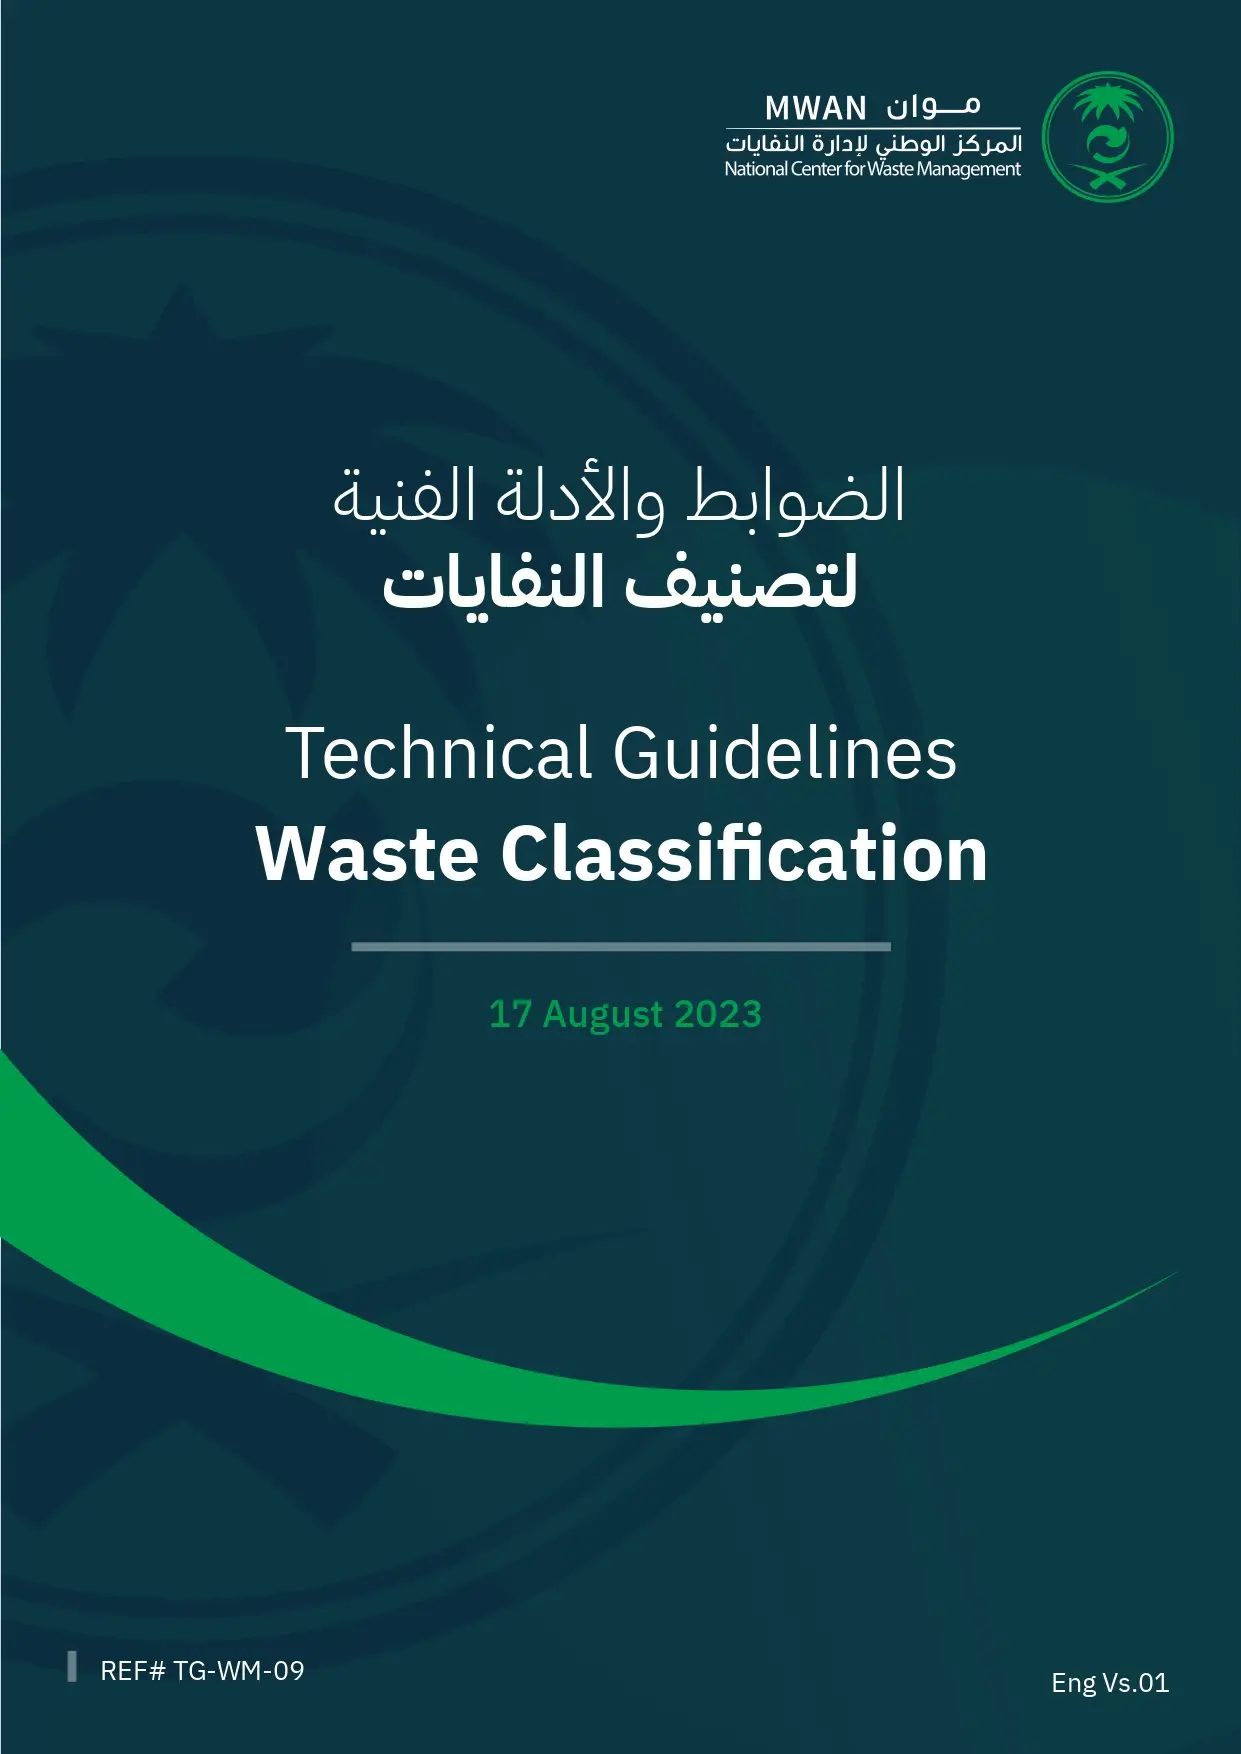 Technical Guidelines: Waste Classification